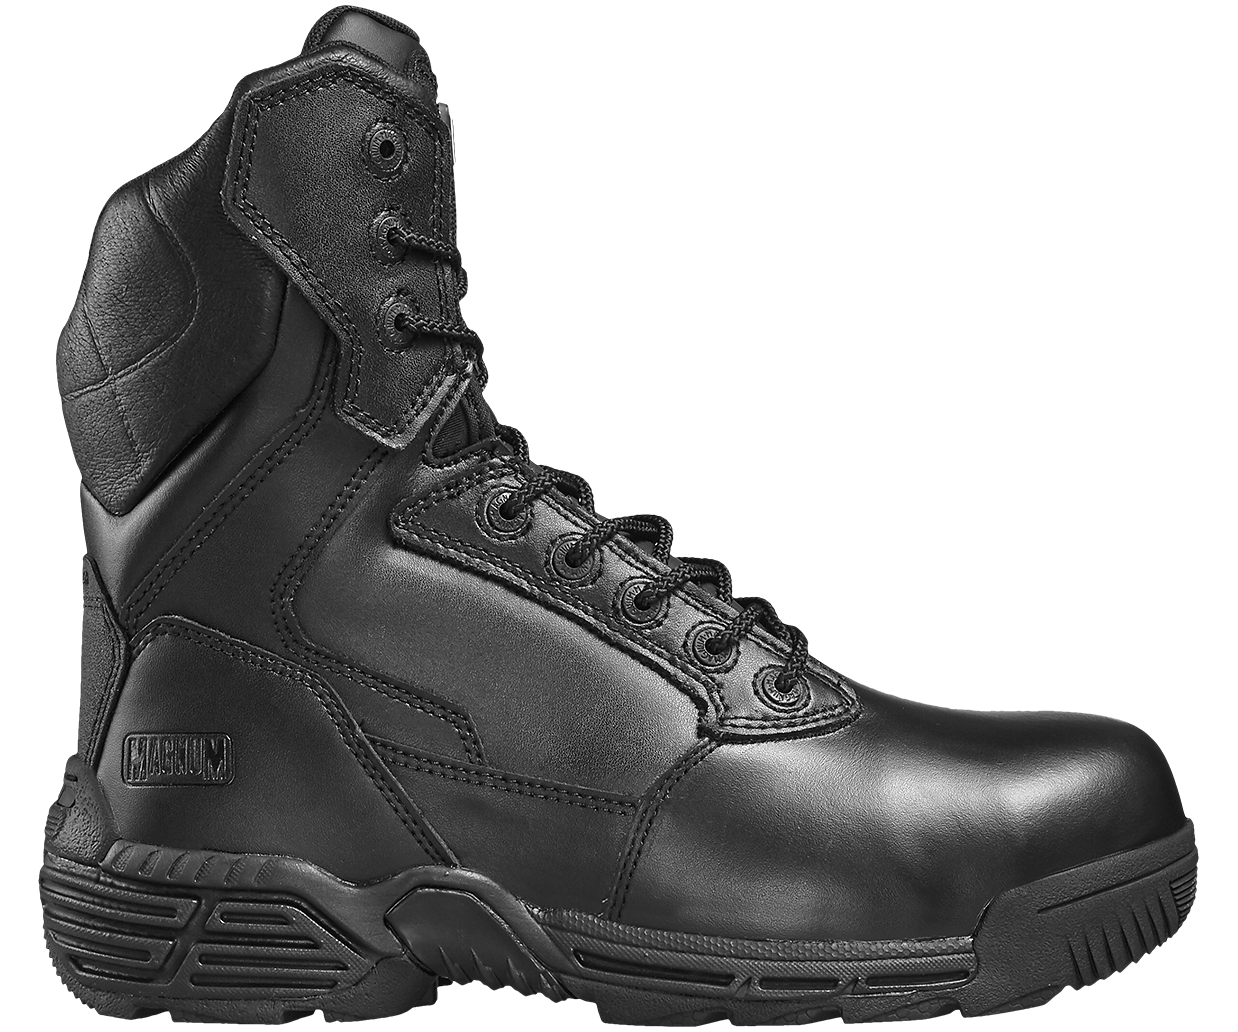 Magnum Boots Canada - Stealth Force 8.0 Boots